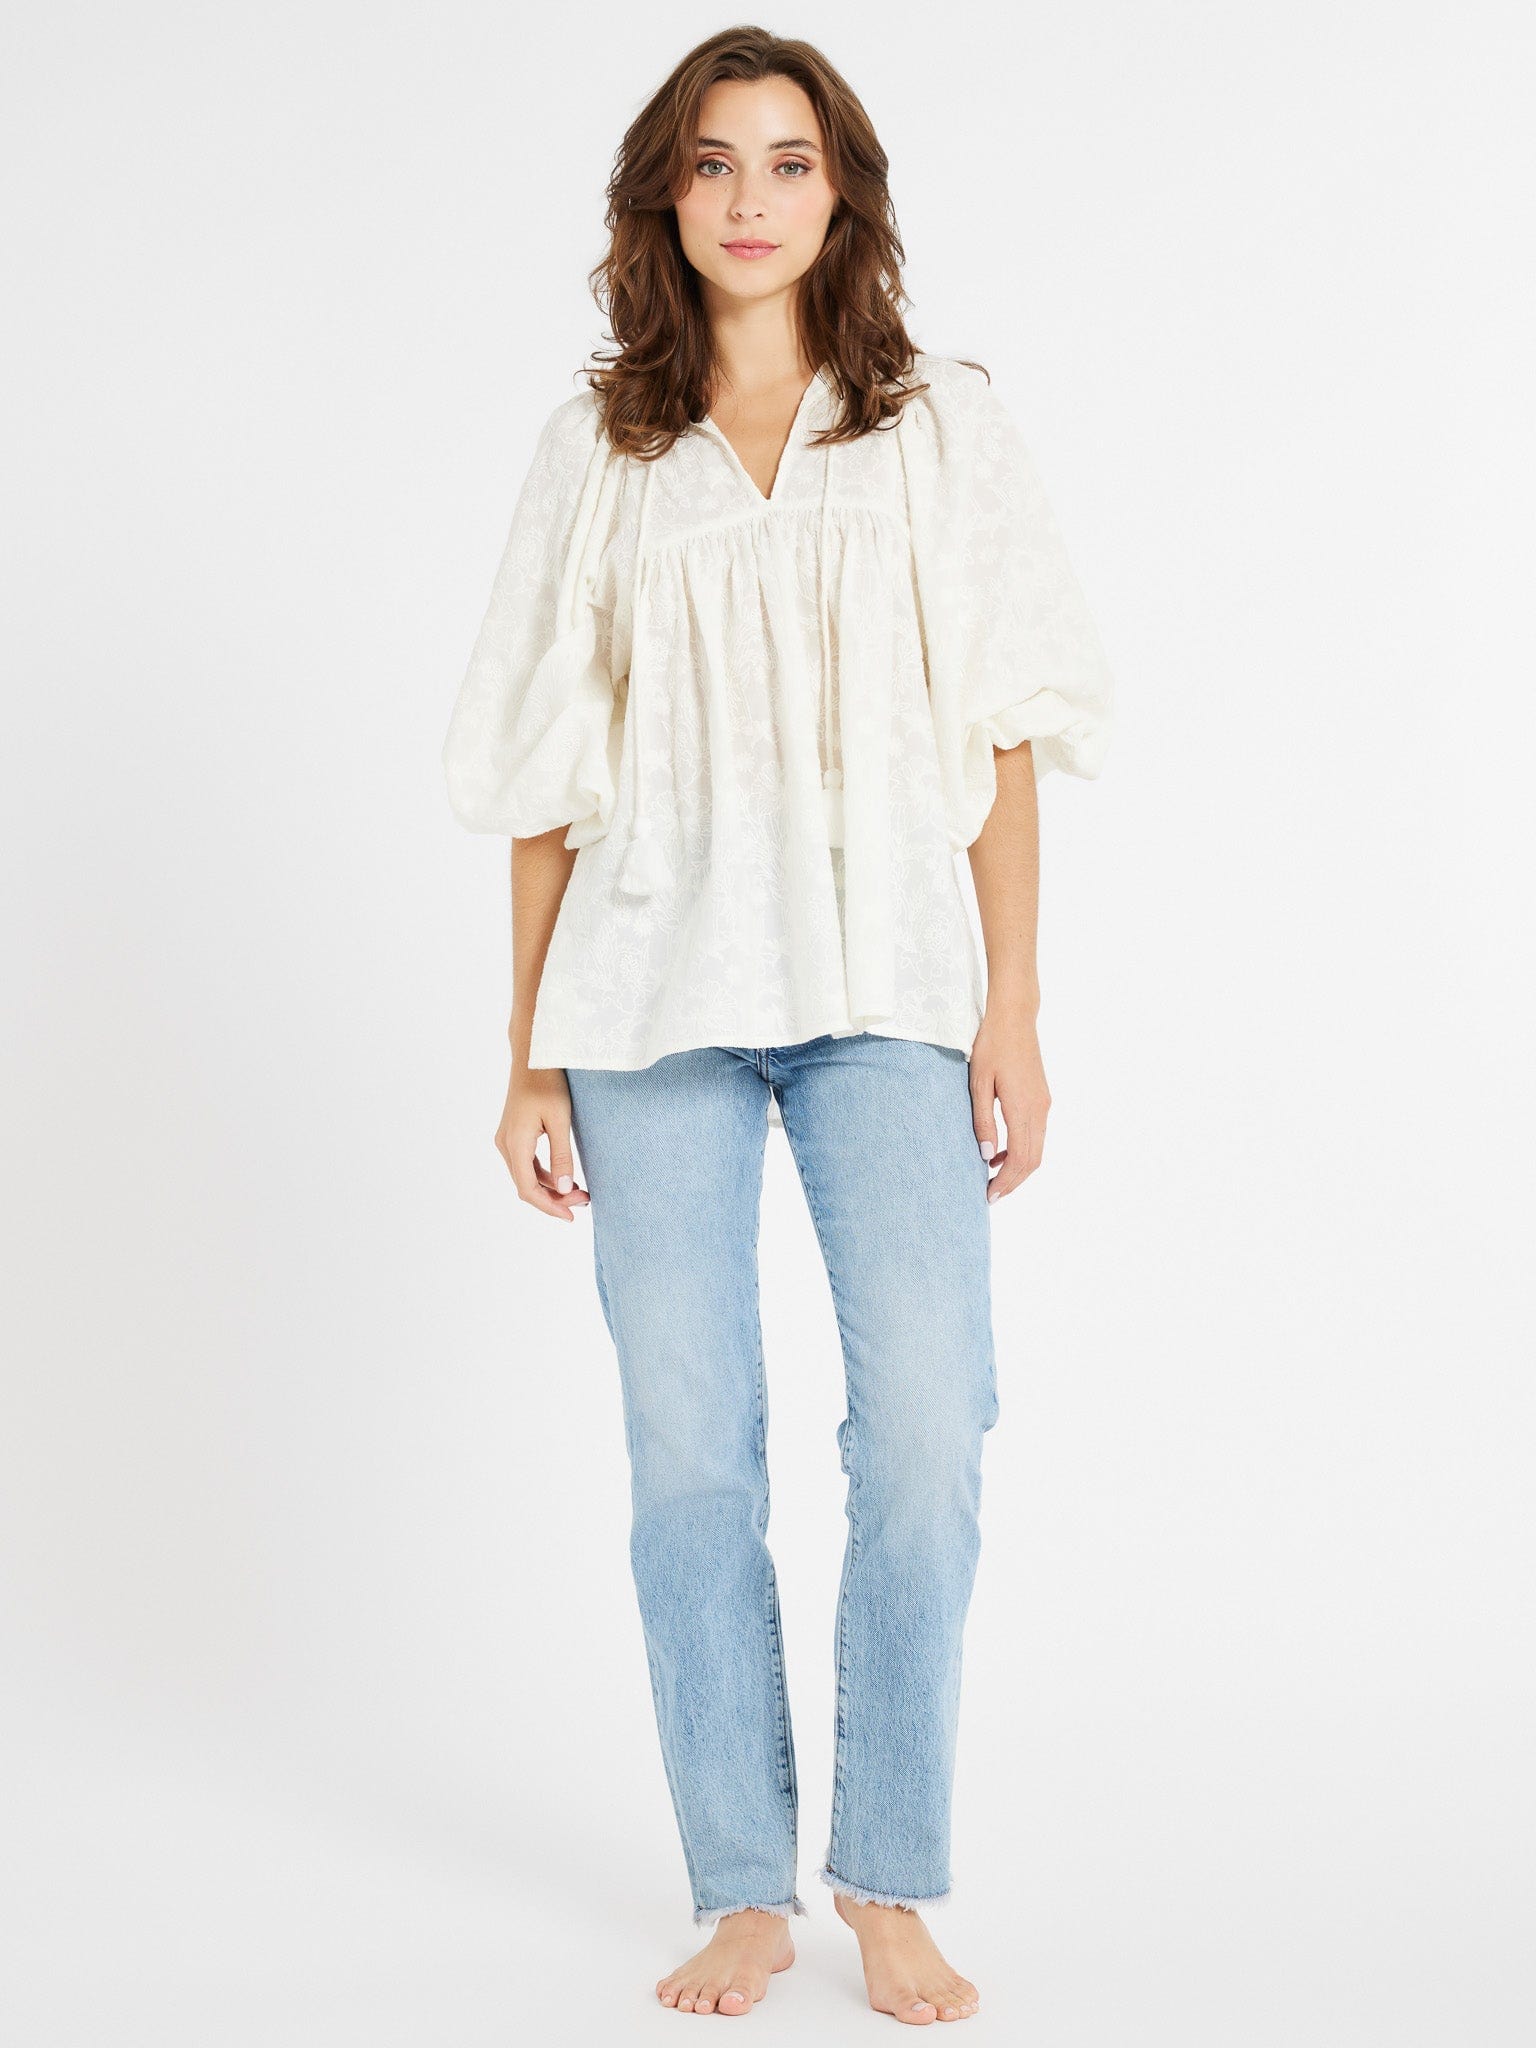 MILLE Clothing Charlie Top in Garden Embroidery